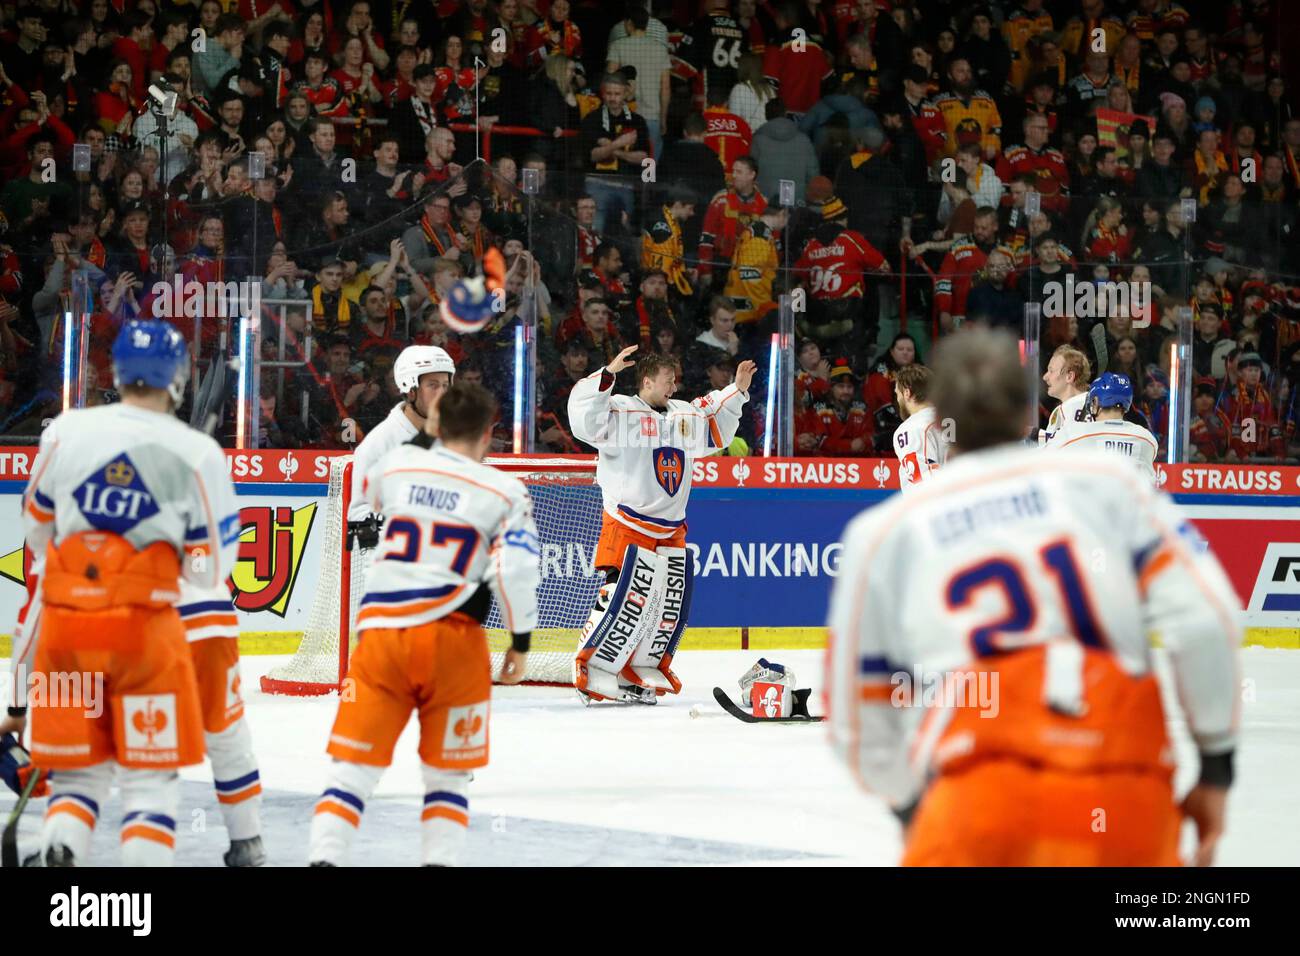 Tappara players celebrates winning the Champions Hockey League final ice hockey match between Lulea Hockey and Tappara Tampere at Coop Norrbotten Arena in Lulea, Sweden, Saturday Feb